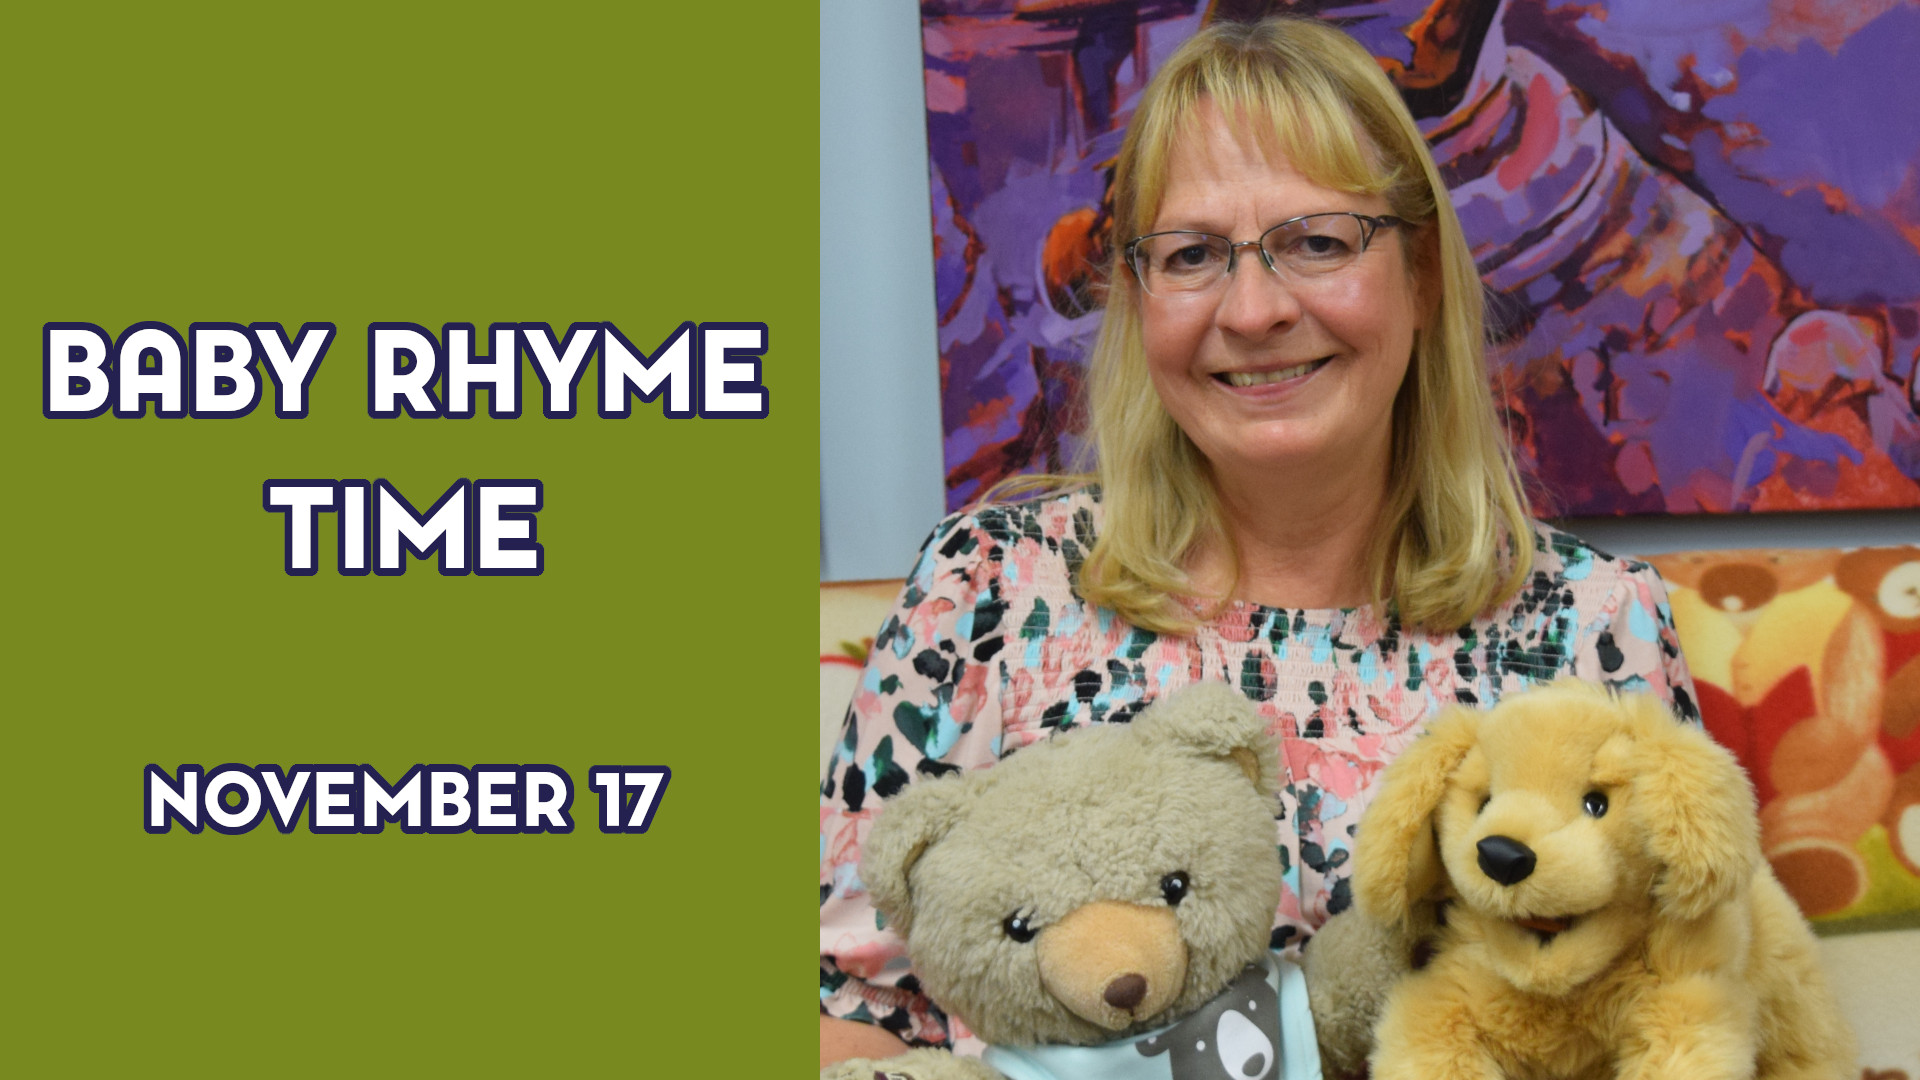 A woman holds stuffed animals next to the text "Baby Rhyme Time November 17"